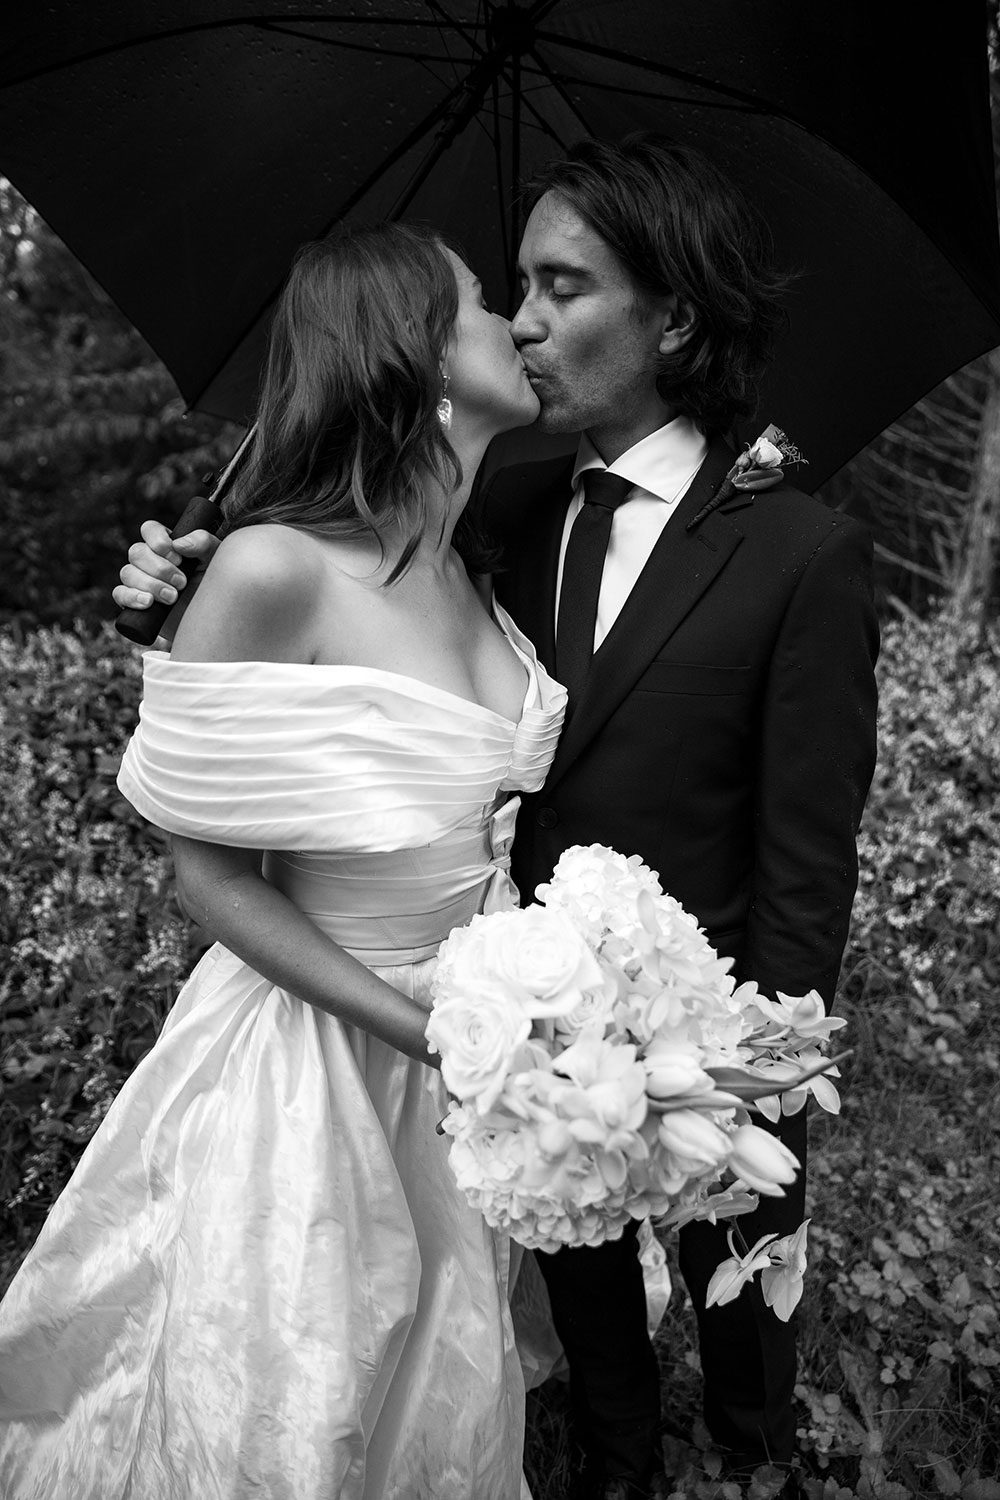 Bride wearing bespoke off shoulder bodice made with silk dupion and long train by NZ wedding dress maker Vinka Designs - black and white kissing groom under umbrella